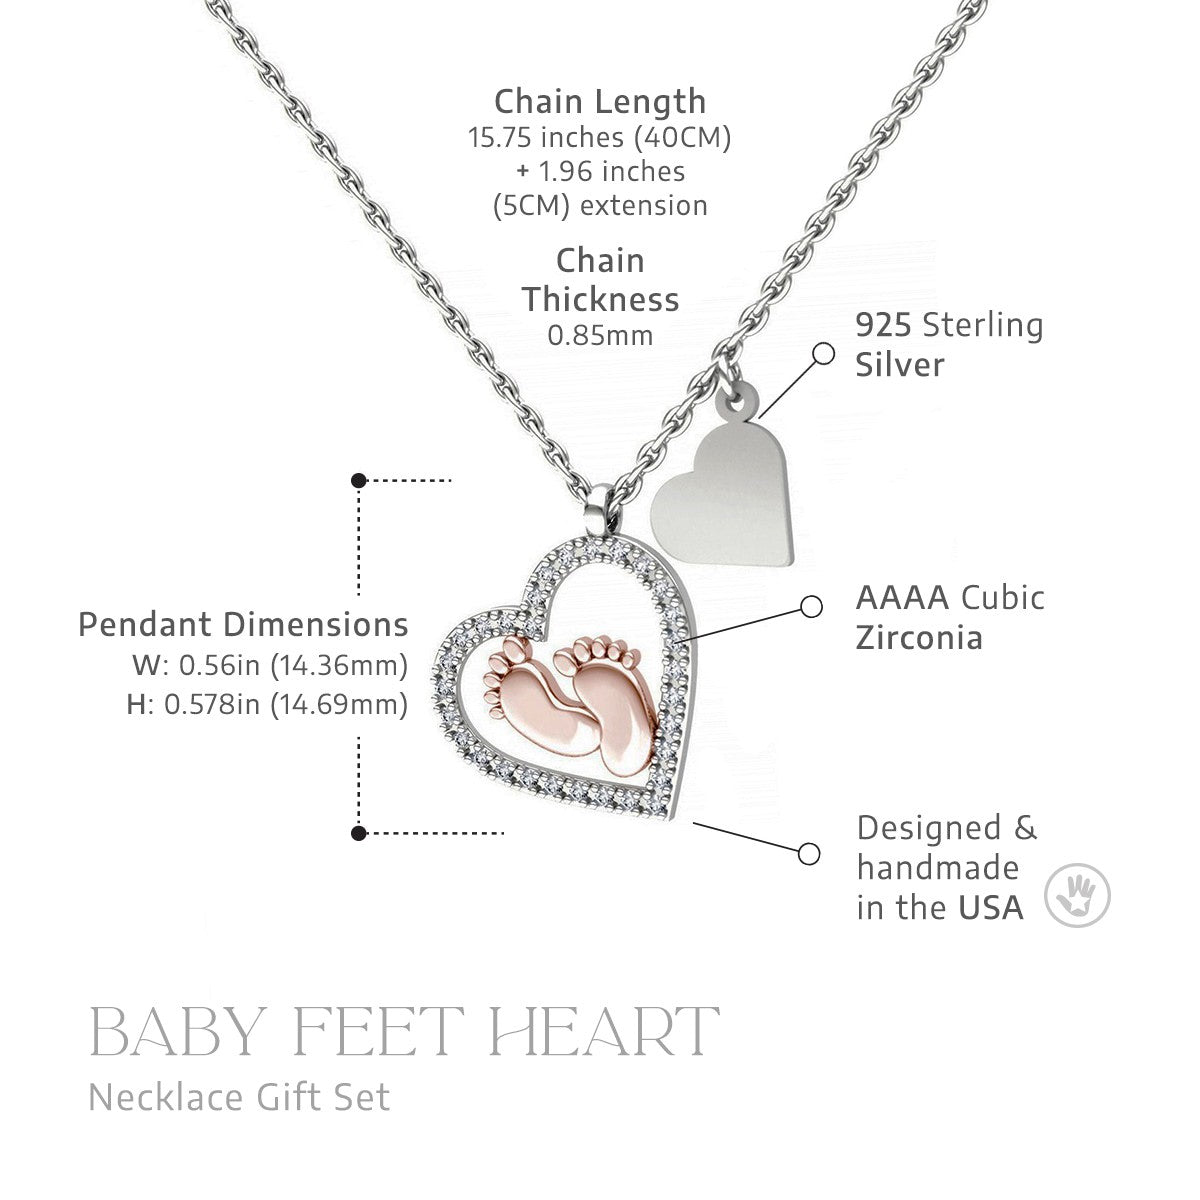 To An Amazing Grandma to Be - Baby Feet Heart Necklace Gift Set